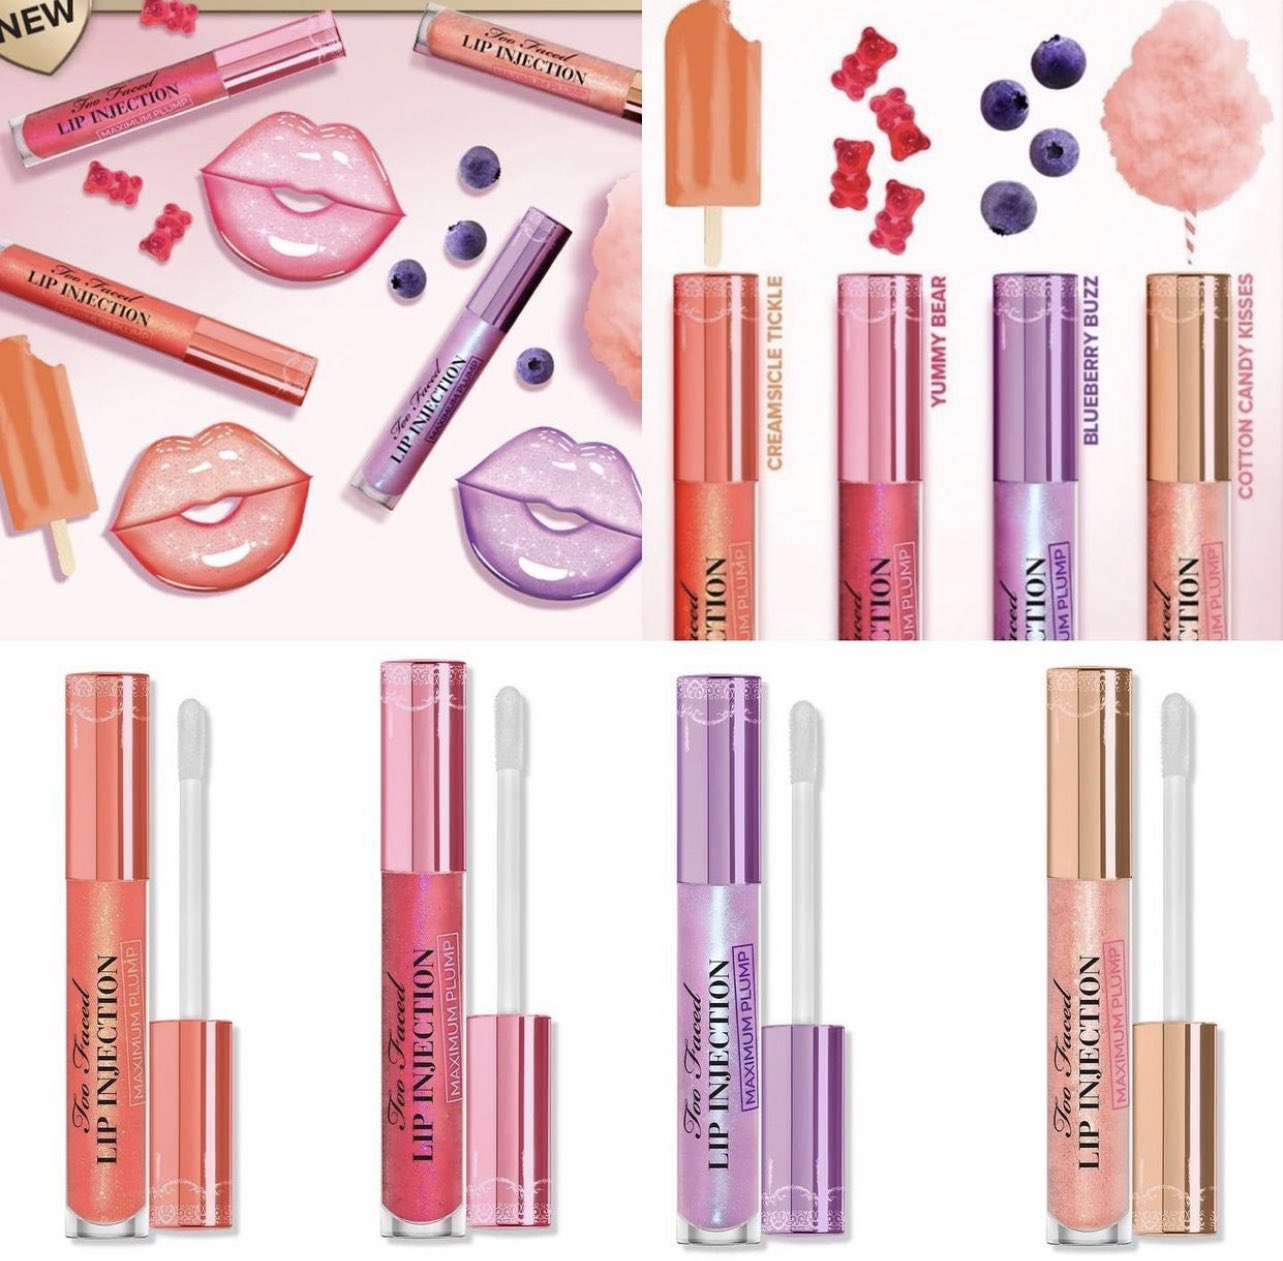 Trendmood on X: Available Now! 🚨 LINK ➡️  4 NEW!  Lip Injection Maximum Plump Shades 👄 #toofaced $33 each: 💕Cotton Candy  💗Yummy Bear 💜Blueberry Buzz 🧡Creamsicle Tickle   / X